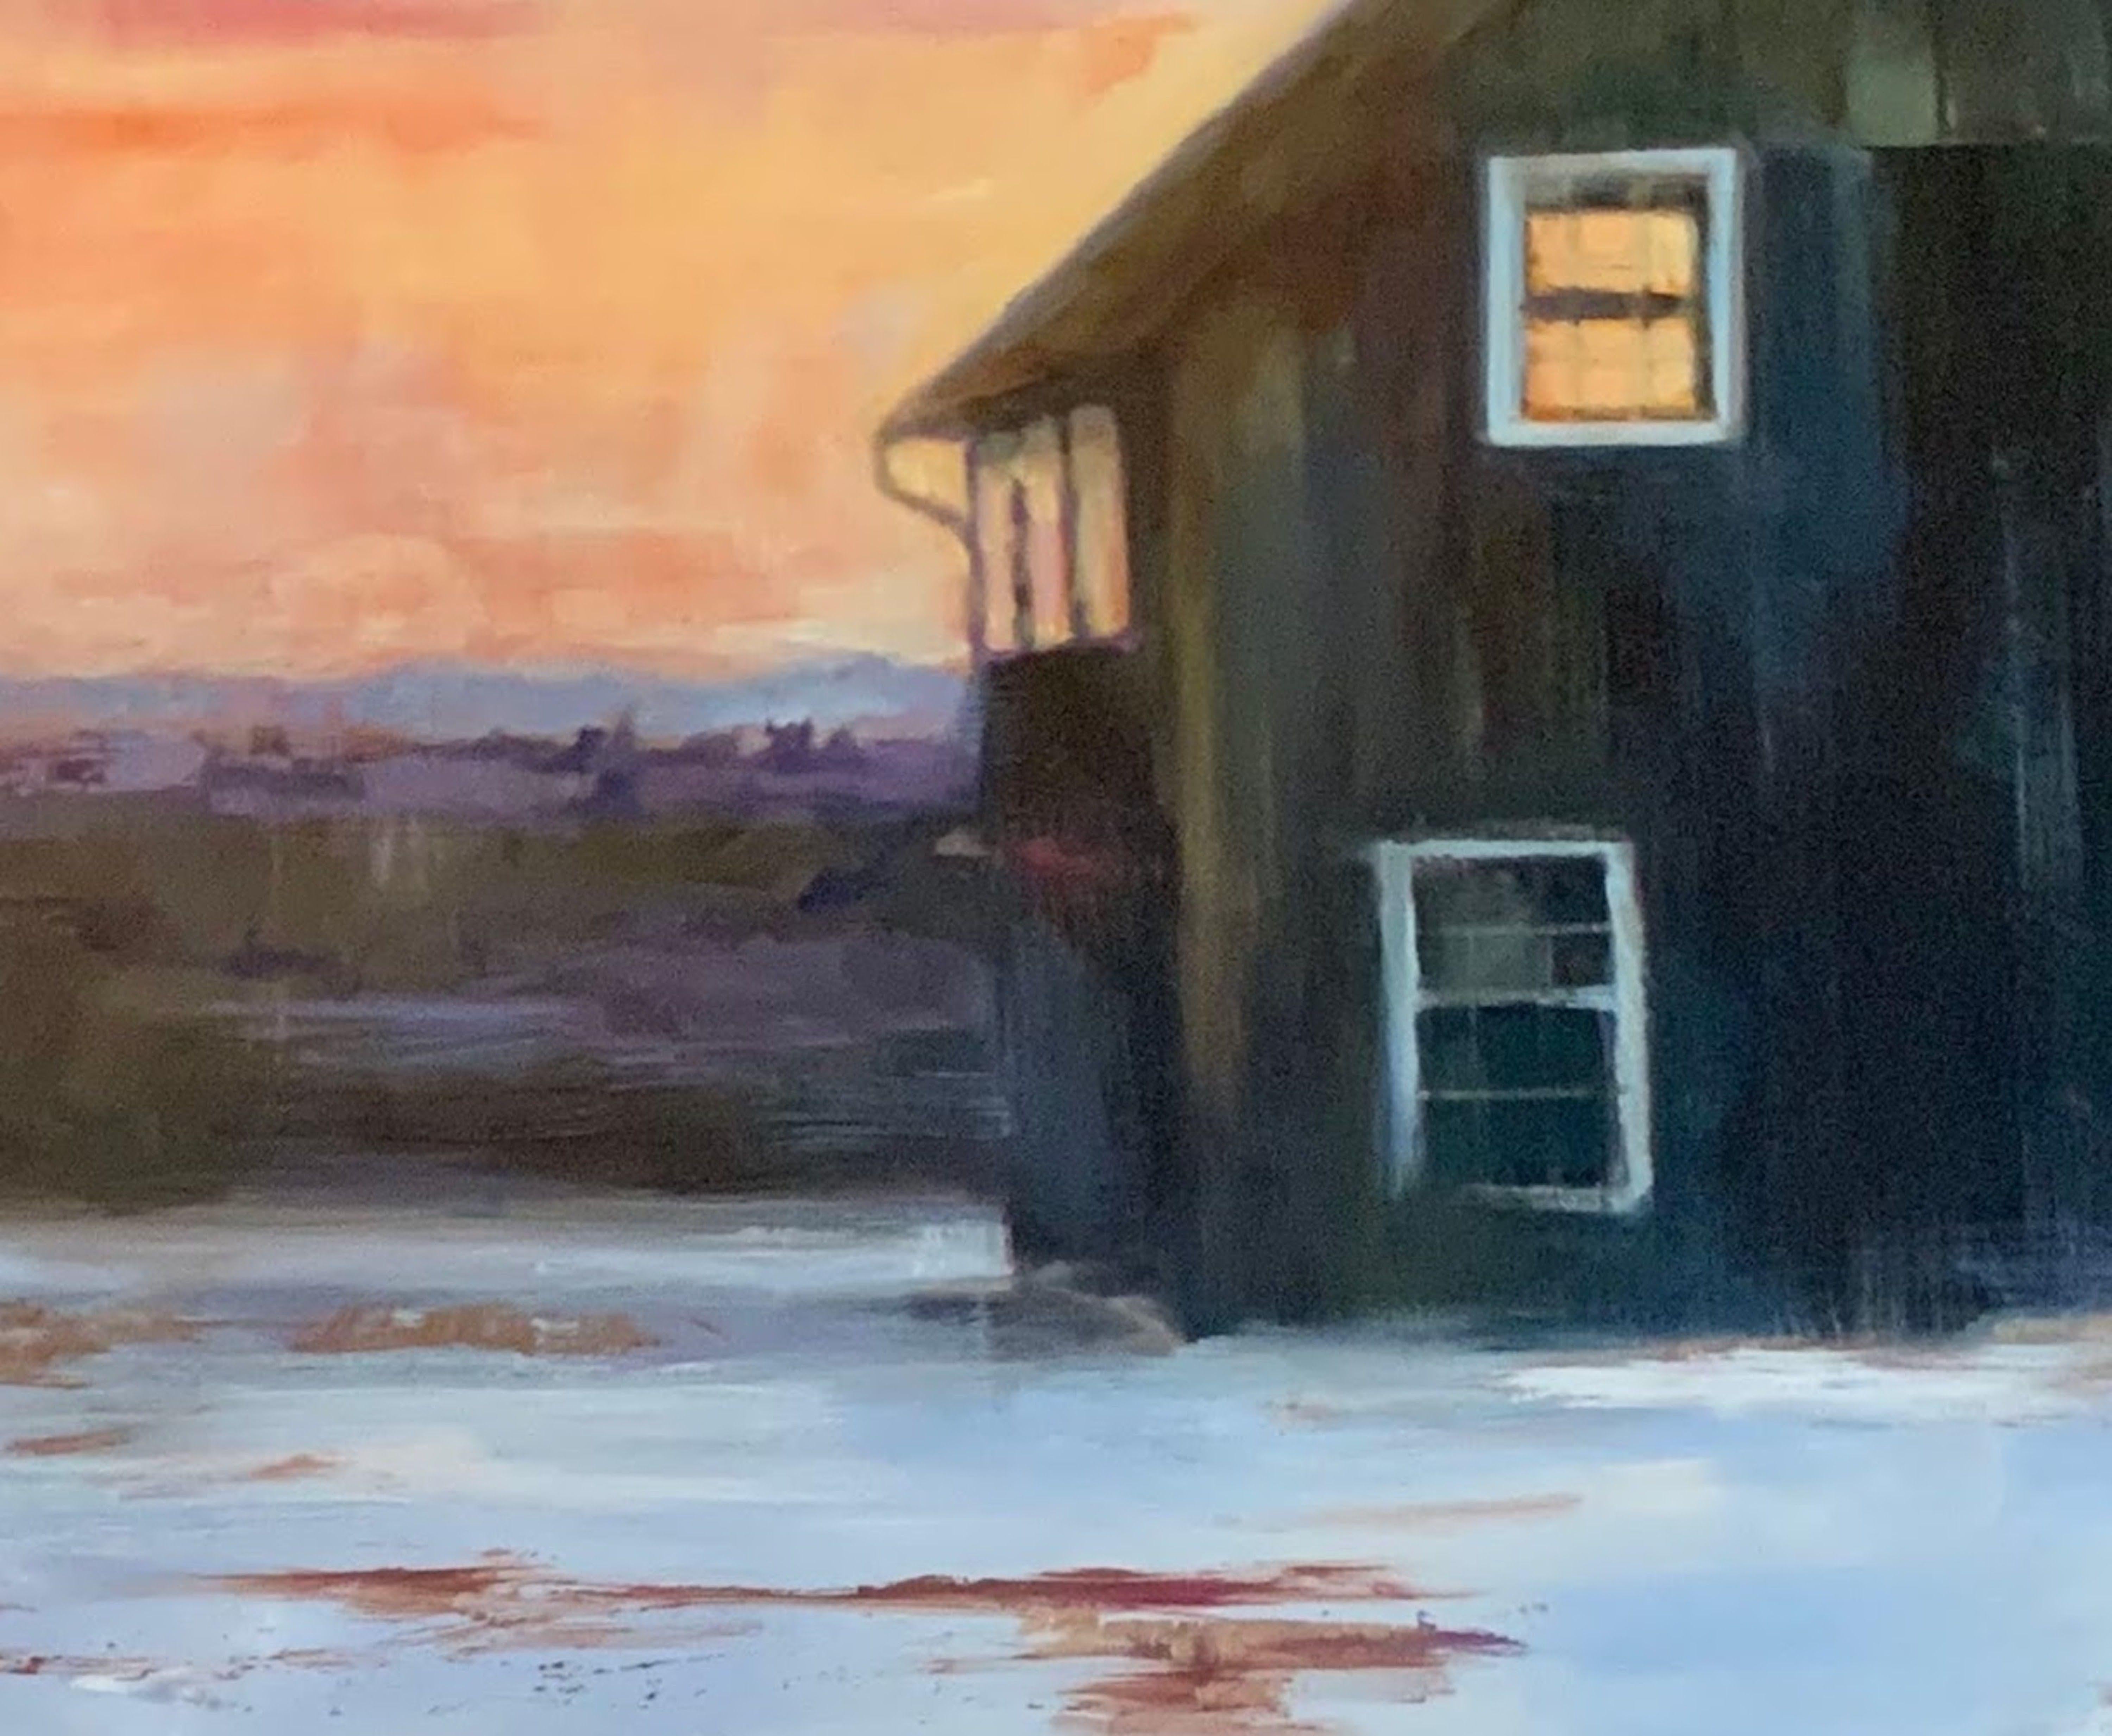 Large sunset fills the sky behind a muted barn on a snowy field. A rugged driveway winds up to the barn, as dried grass pops through the snowy foreground.   Painting ships as rolled canvas to be assembled, unless otherwise specified.  :: Painting ::